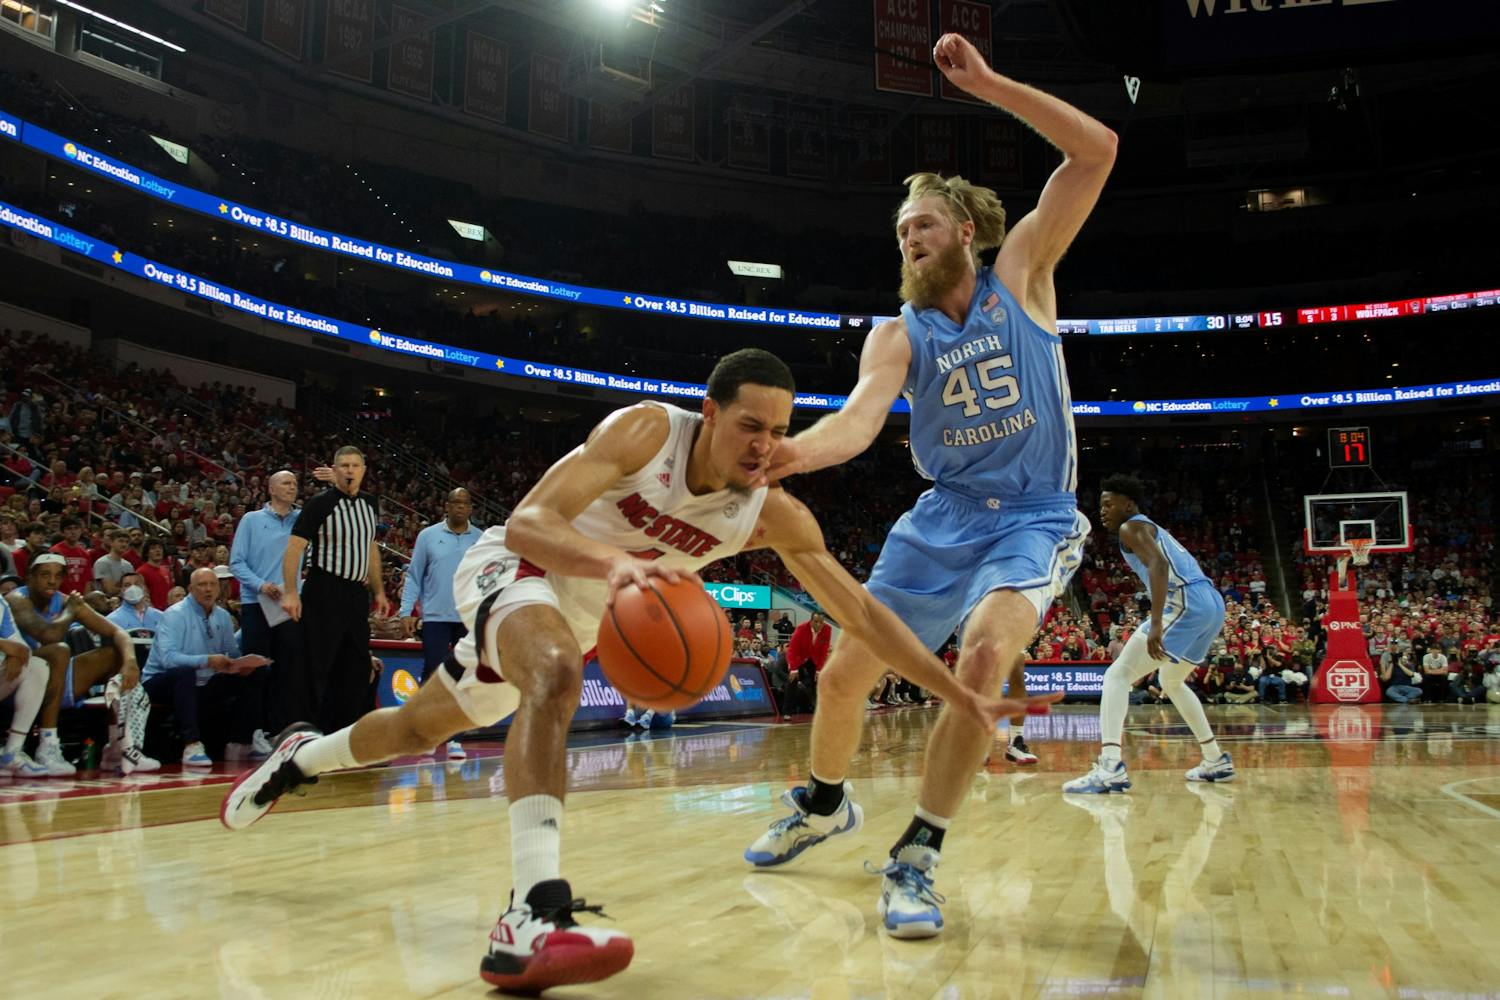 UNC men's basketball eeks out close 70-63 home win against